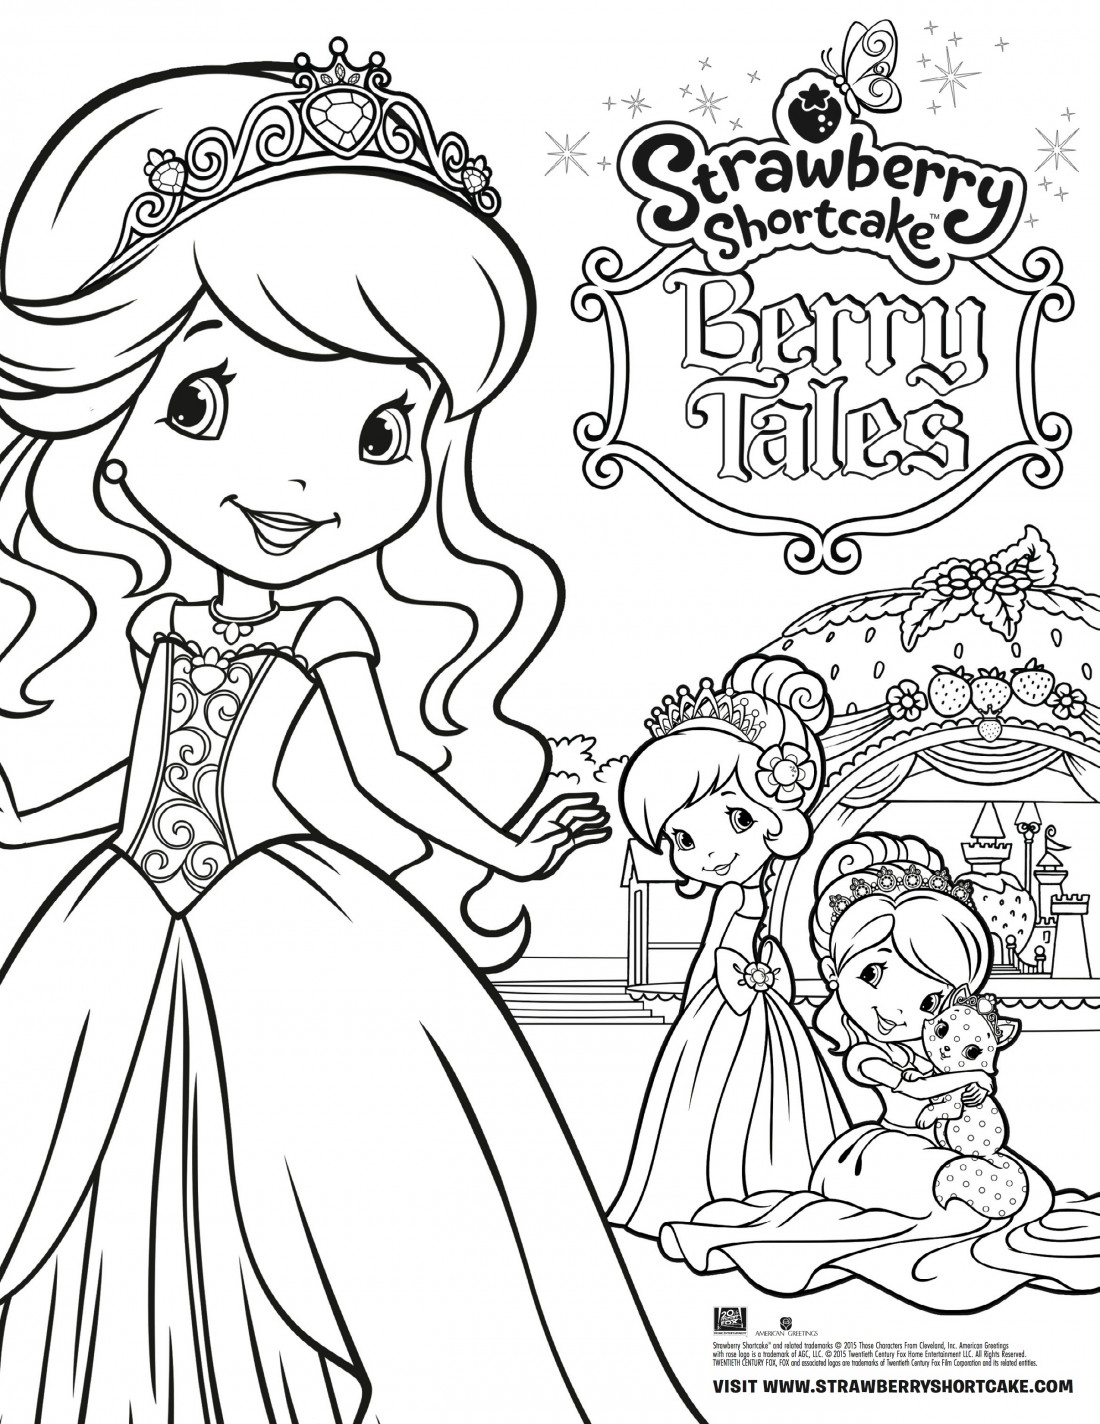 Berry Tales Coloring Sheet